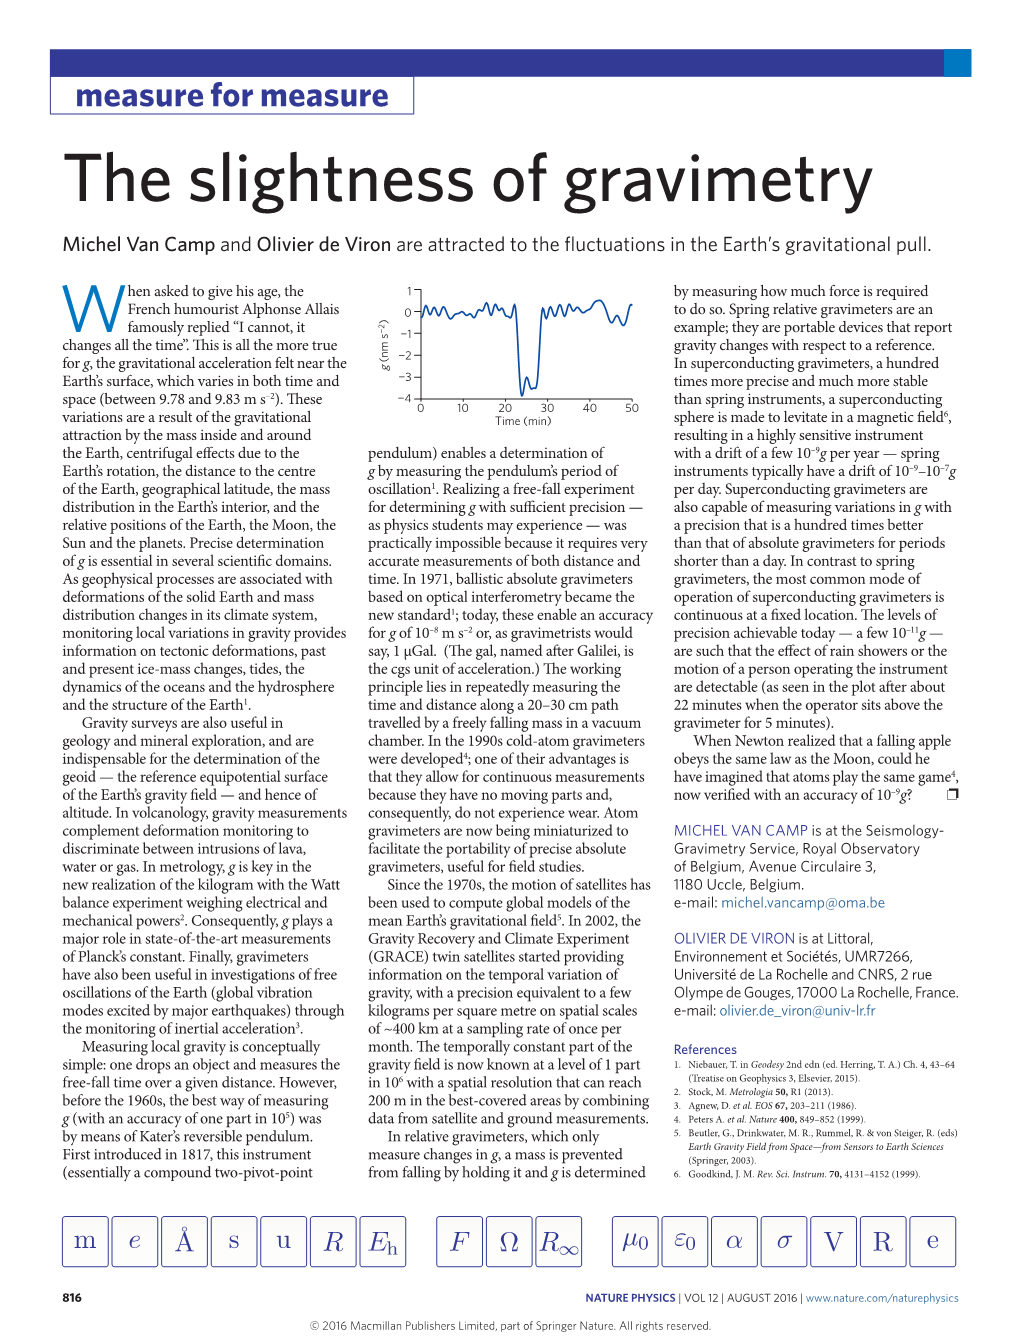 The Slightness of Gravimetry Michel Van Camp and Olivier De Viron Are Attracted to the Fluctuations in the Earth’S Gravitational Pull